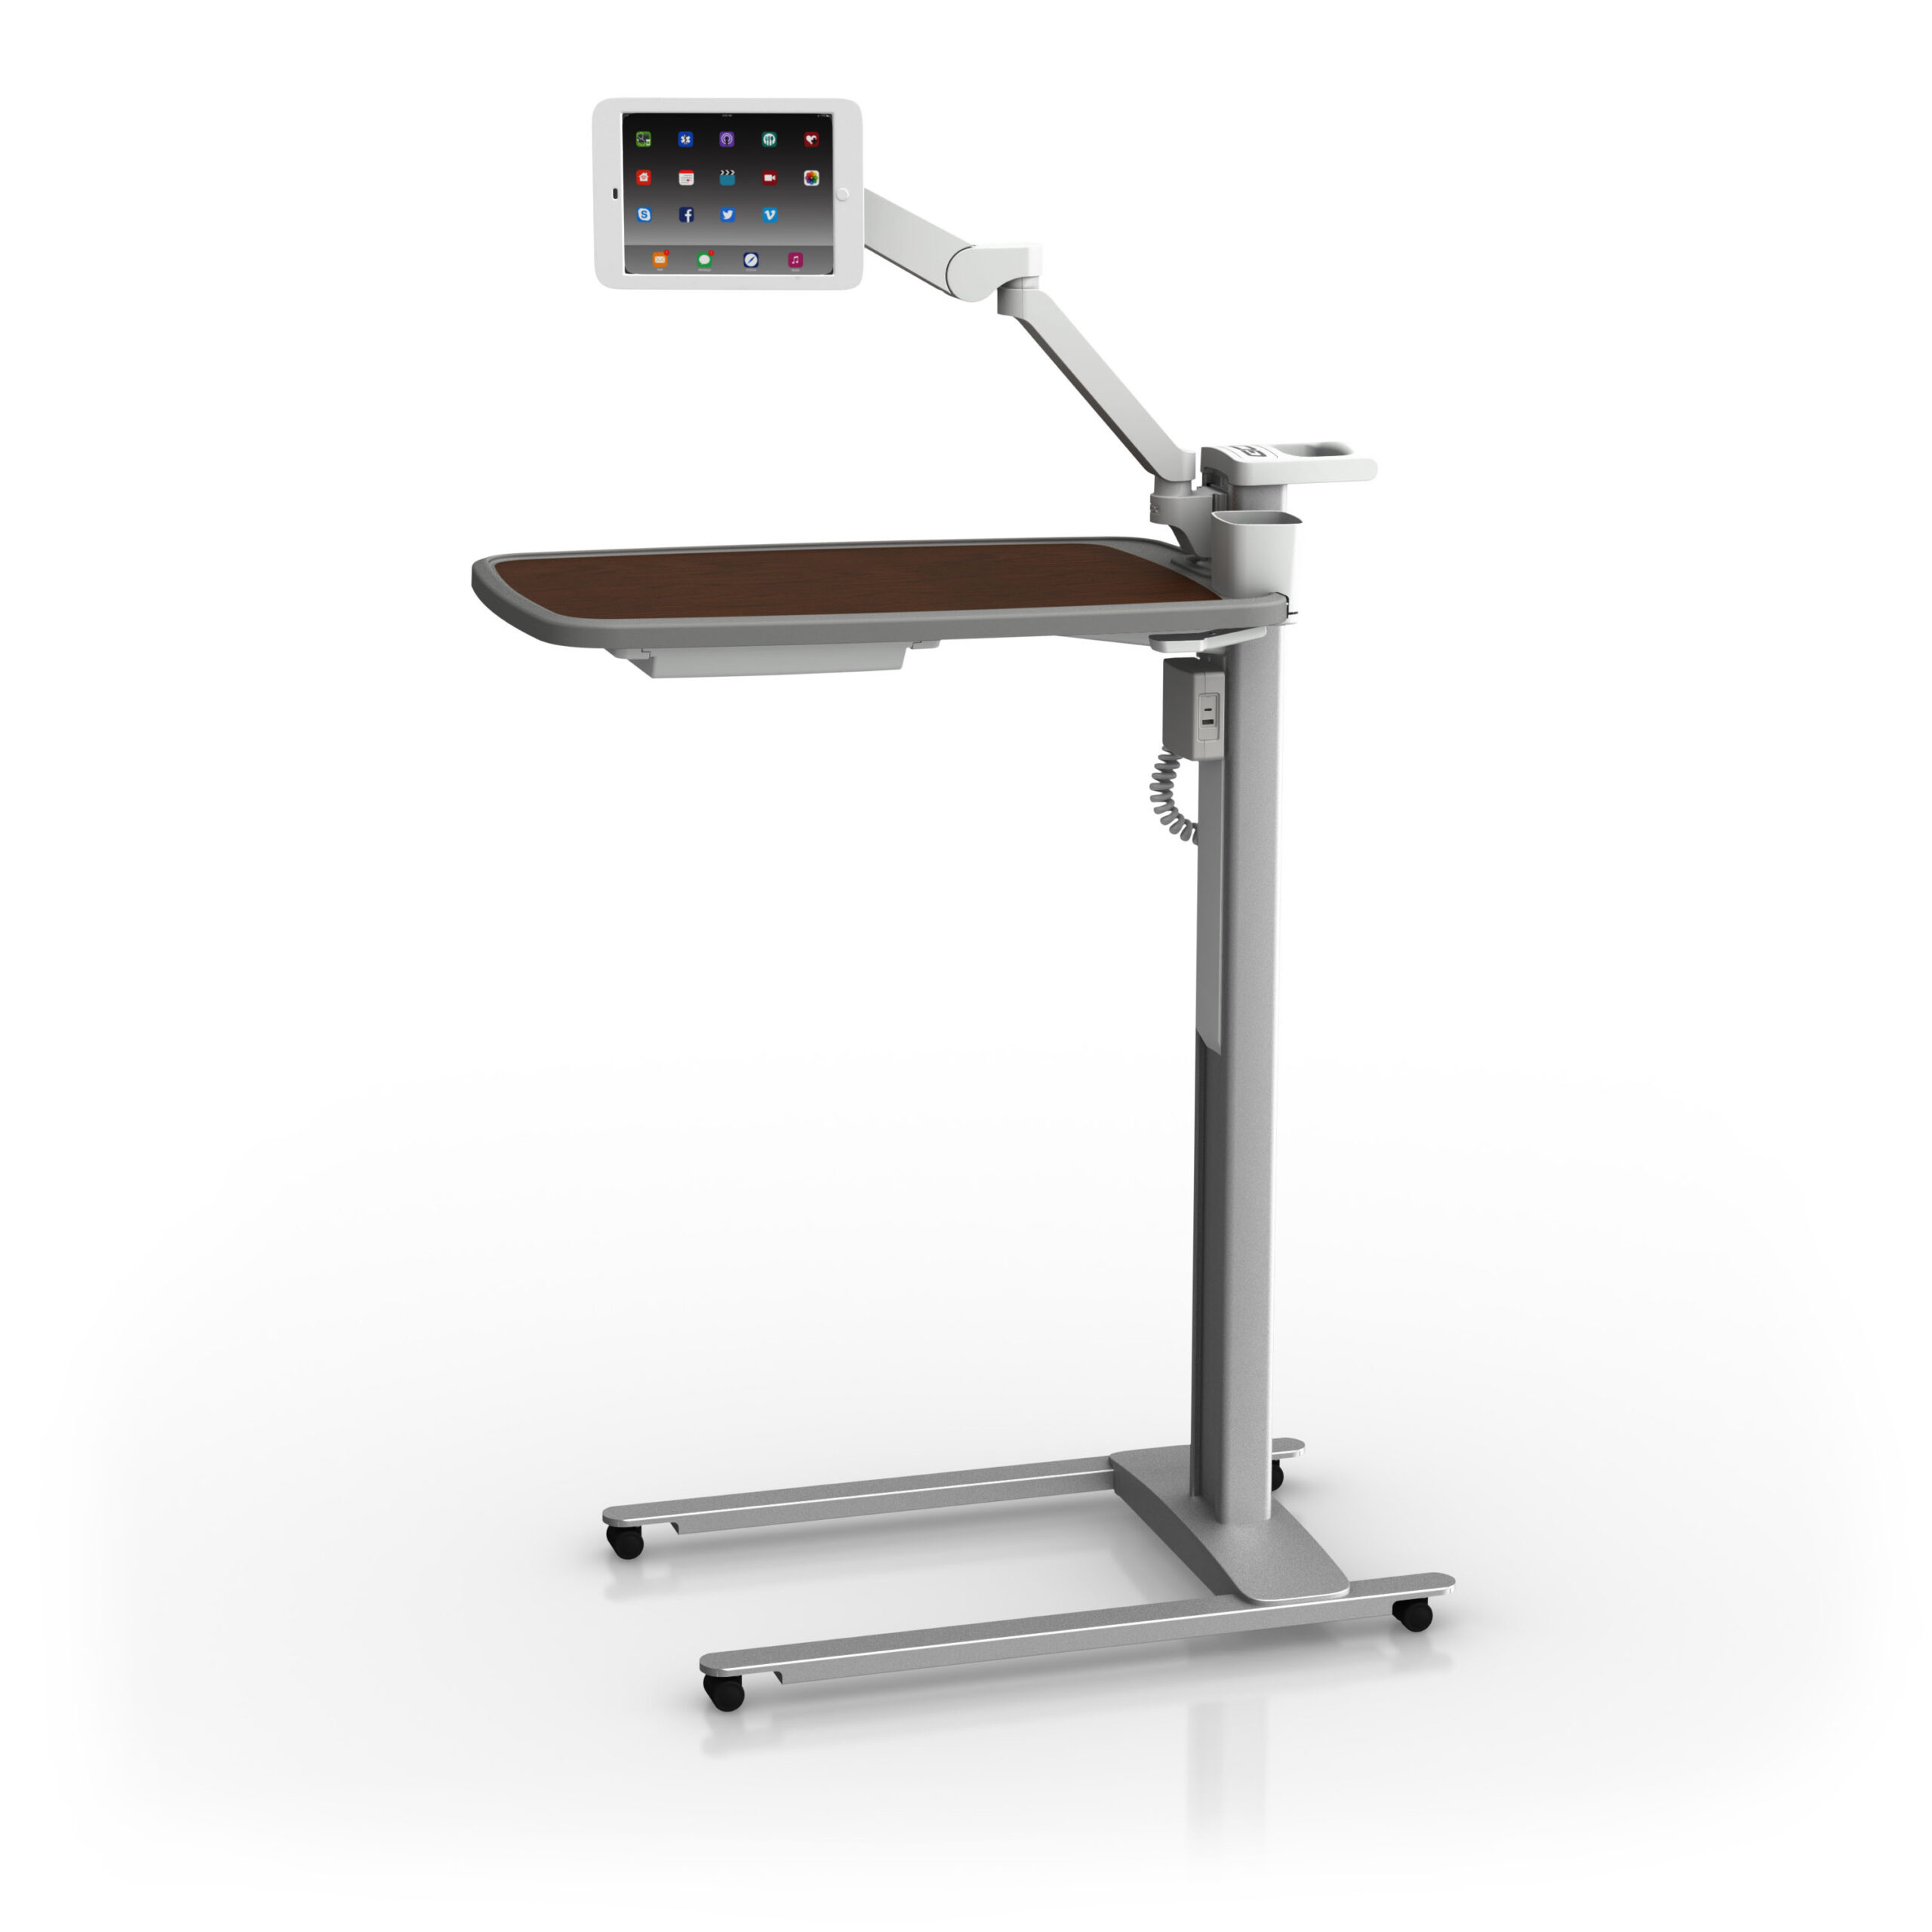 OBT-0011-61-05-44 - OBT-0011-61-05-44 – Shaker Cherry Patient Engagement Overbed Table with PRO-ADJUST™ Tablet Arm